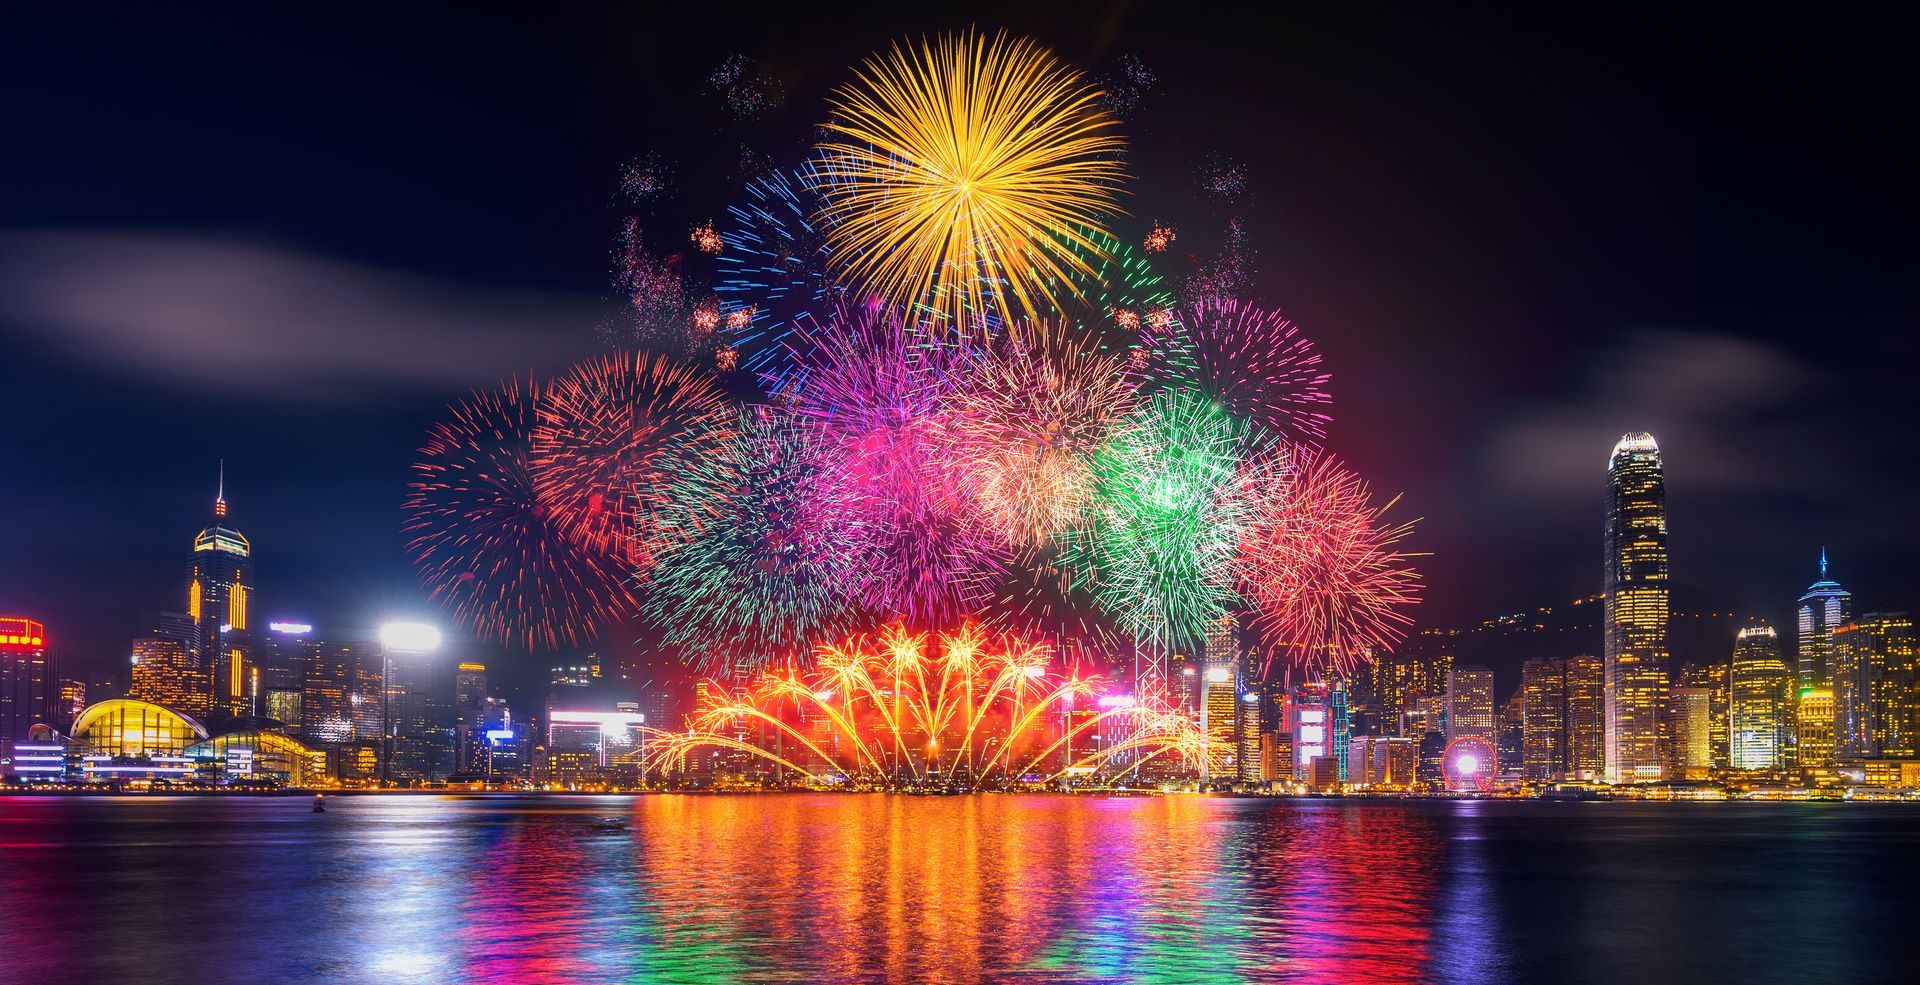 fireworks are displayed over a body of water in front of a city skyline in Hong Kong for Chinese New Year 